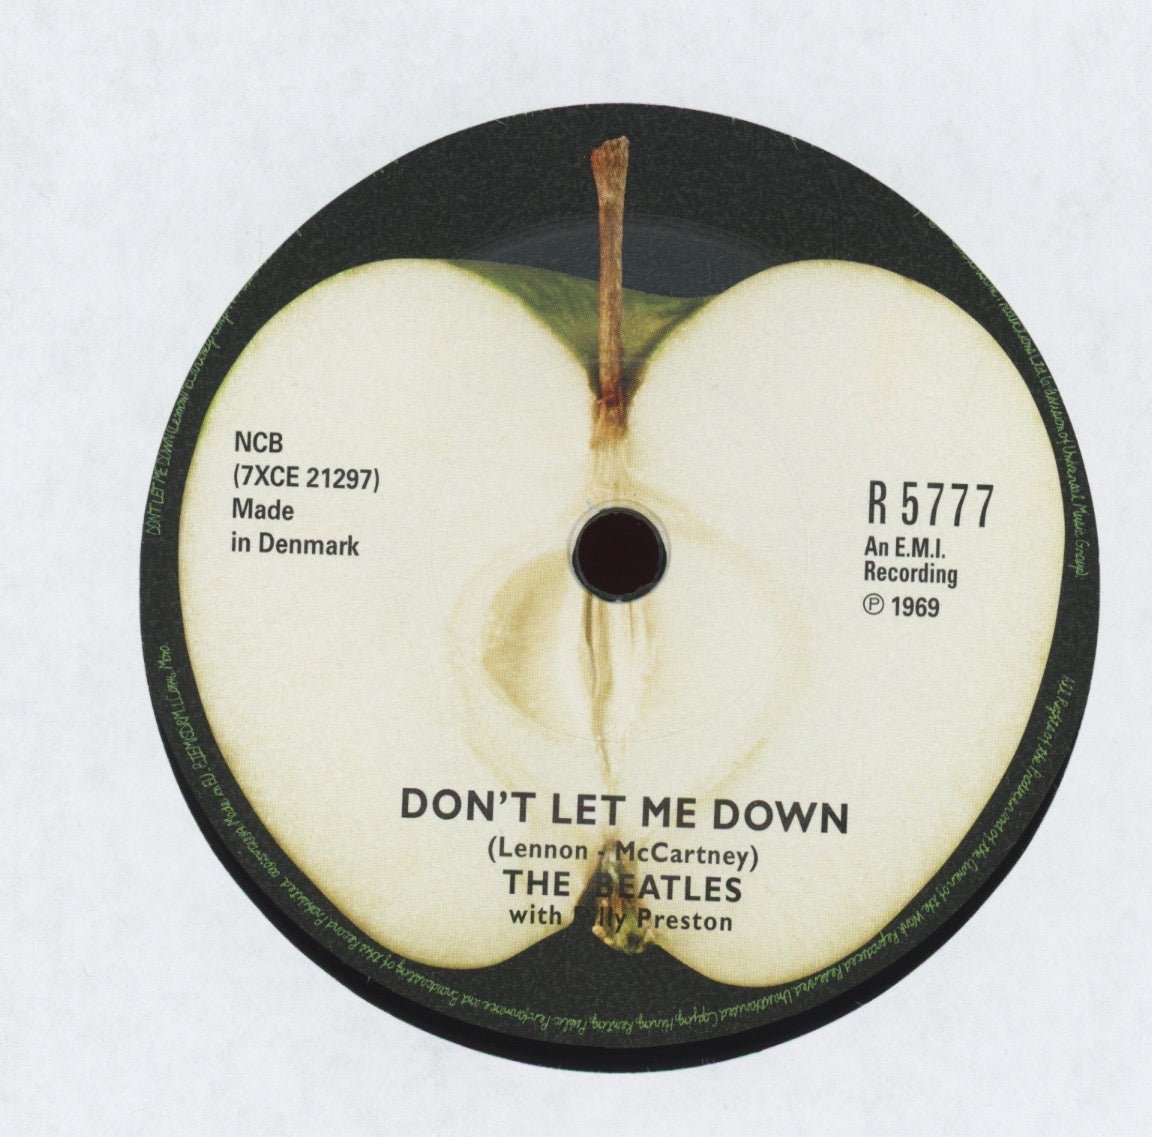 The Beatles - Get Back / Don't Let Me Down on Apple 7" Reissue With Picture Sleeve